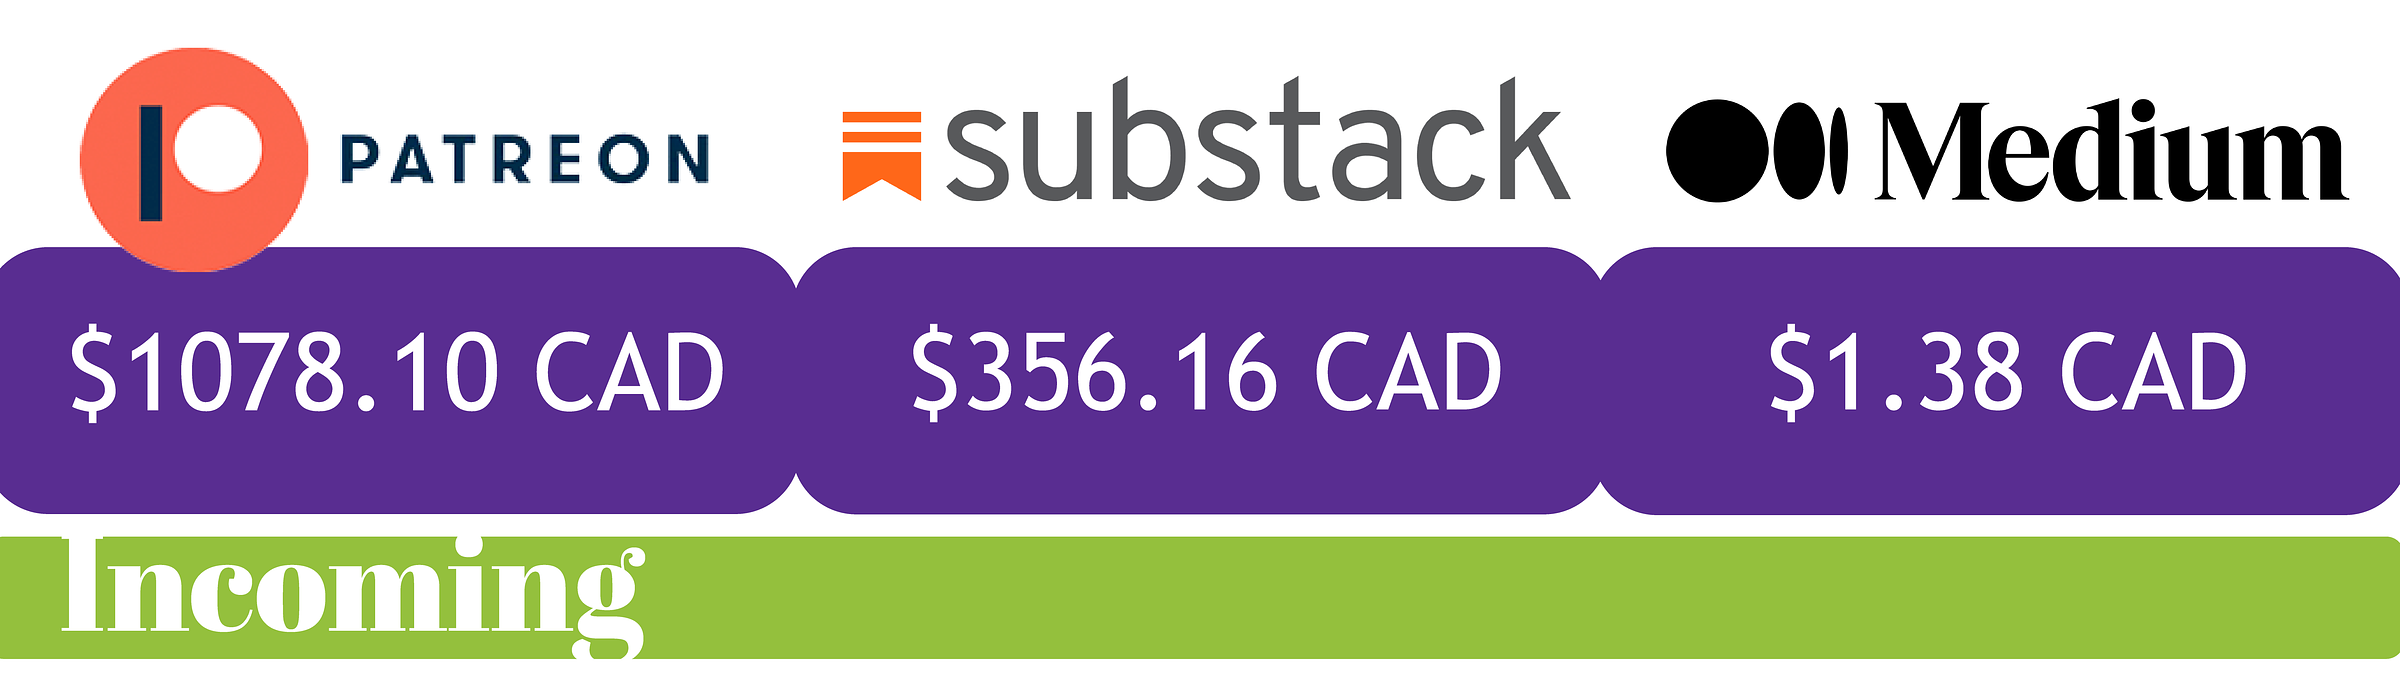 A graphic showing my earnings from Patreon ($1078.10), Substack ($356.16), and Medium ($1.38) 